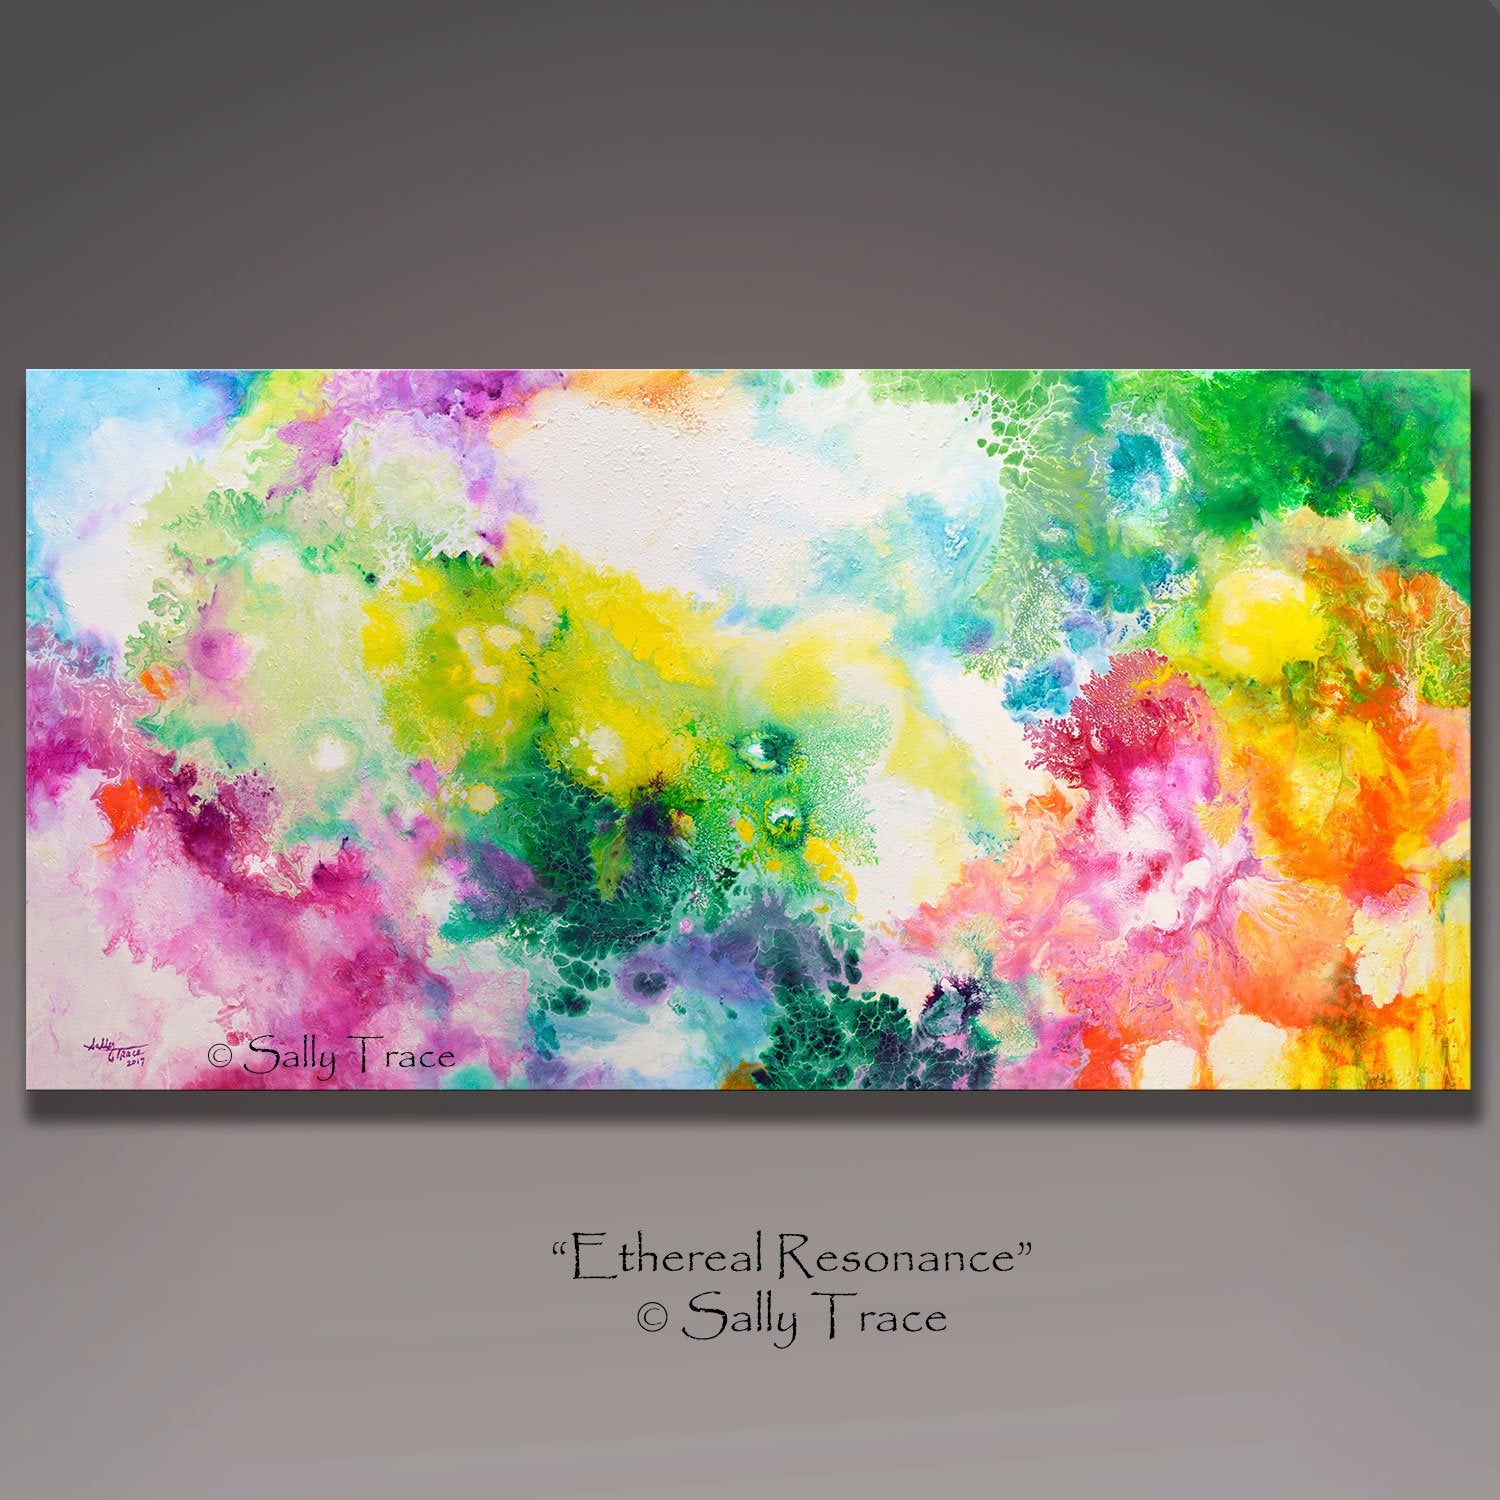 Ethereal Resonance, giclee print on stretched canvas from the original fluid painting by Sally Trace